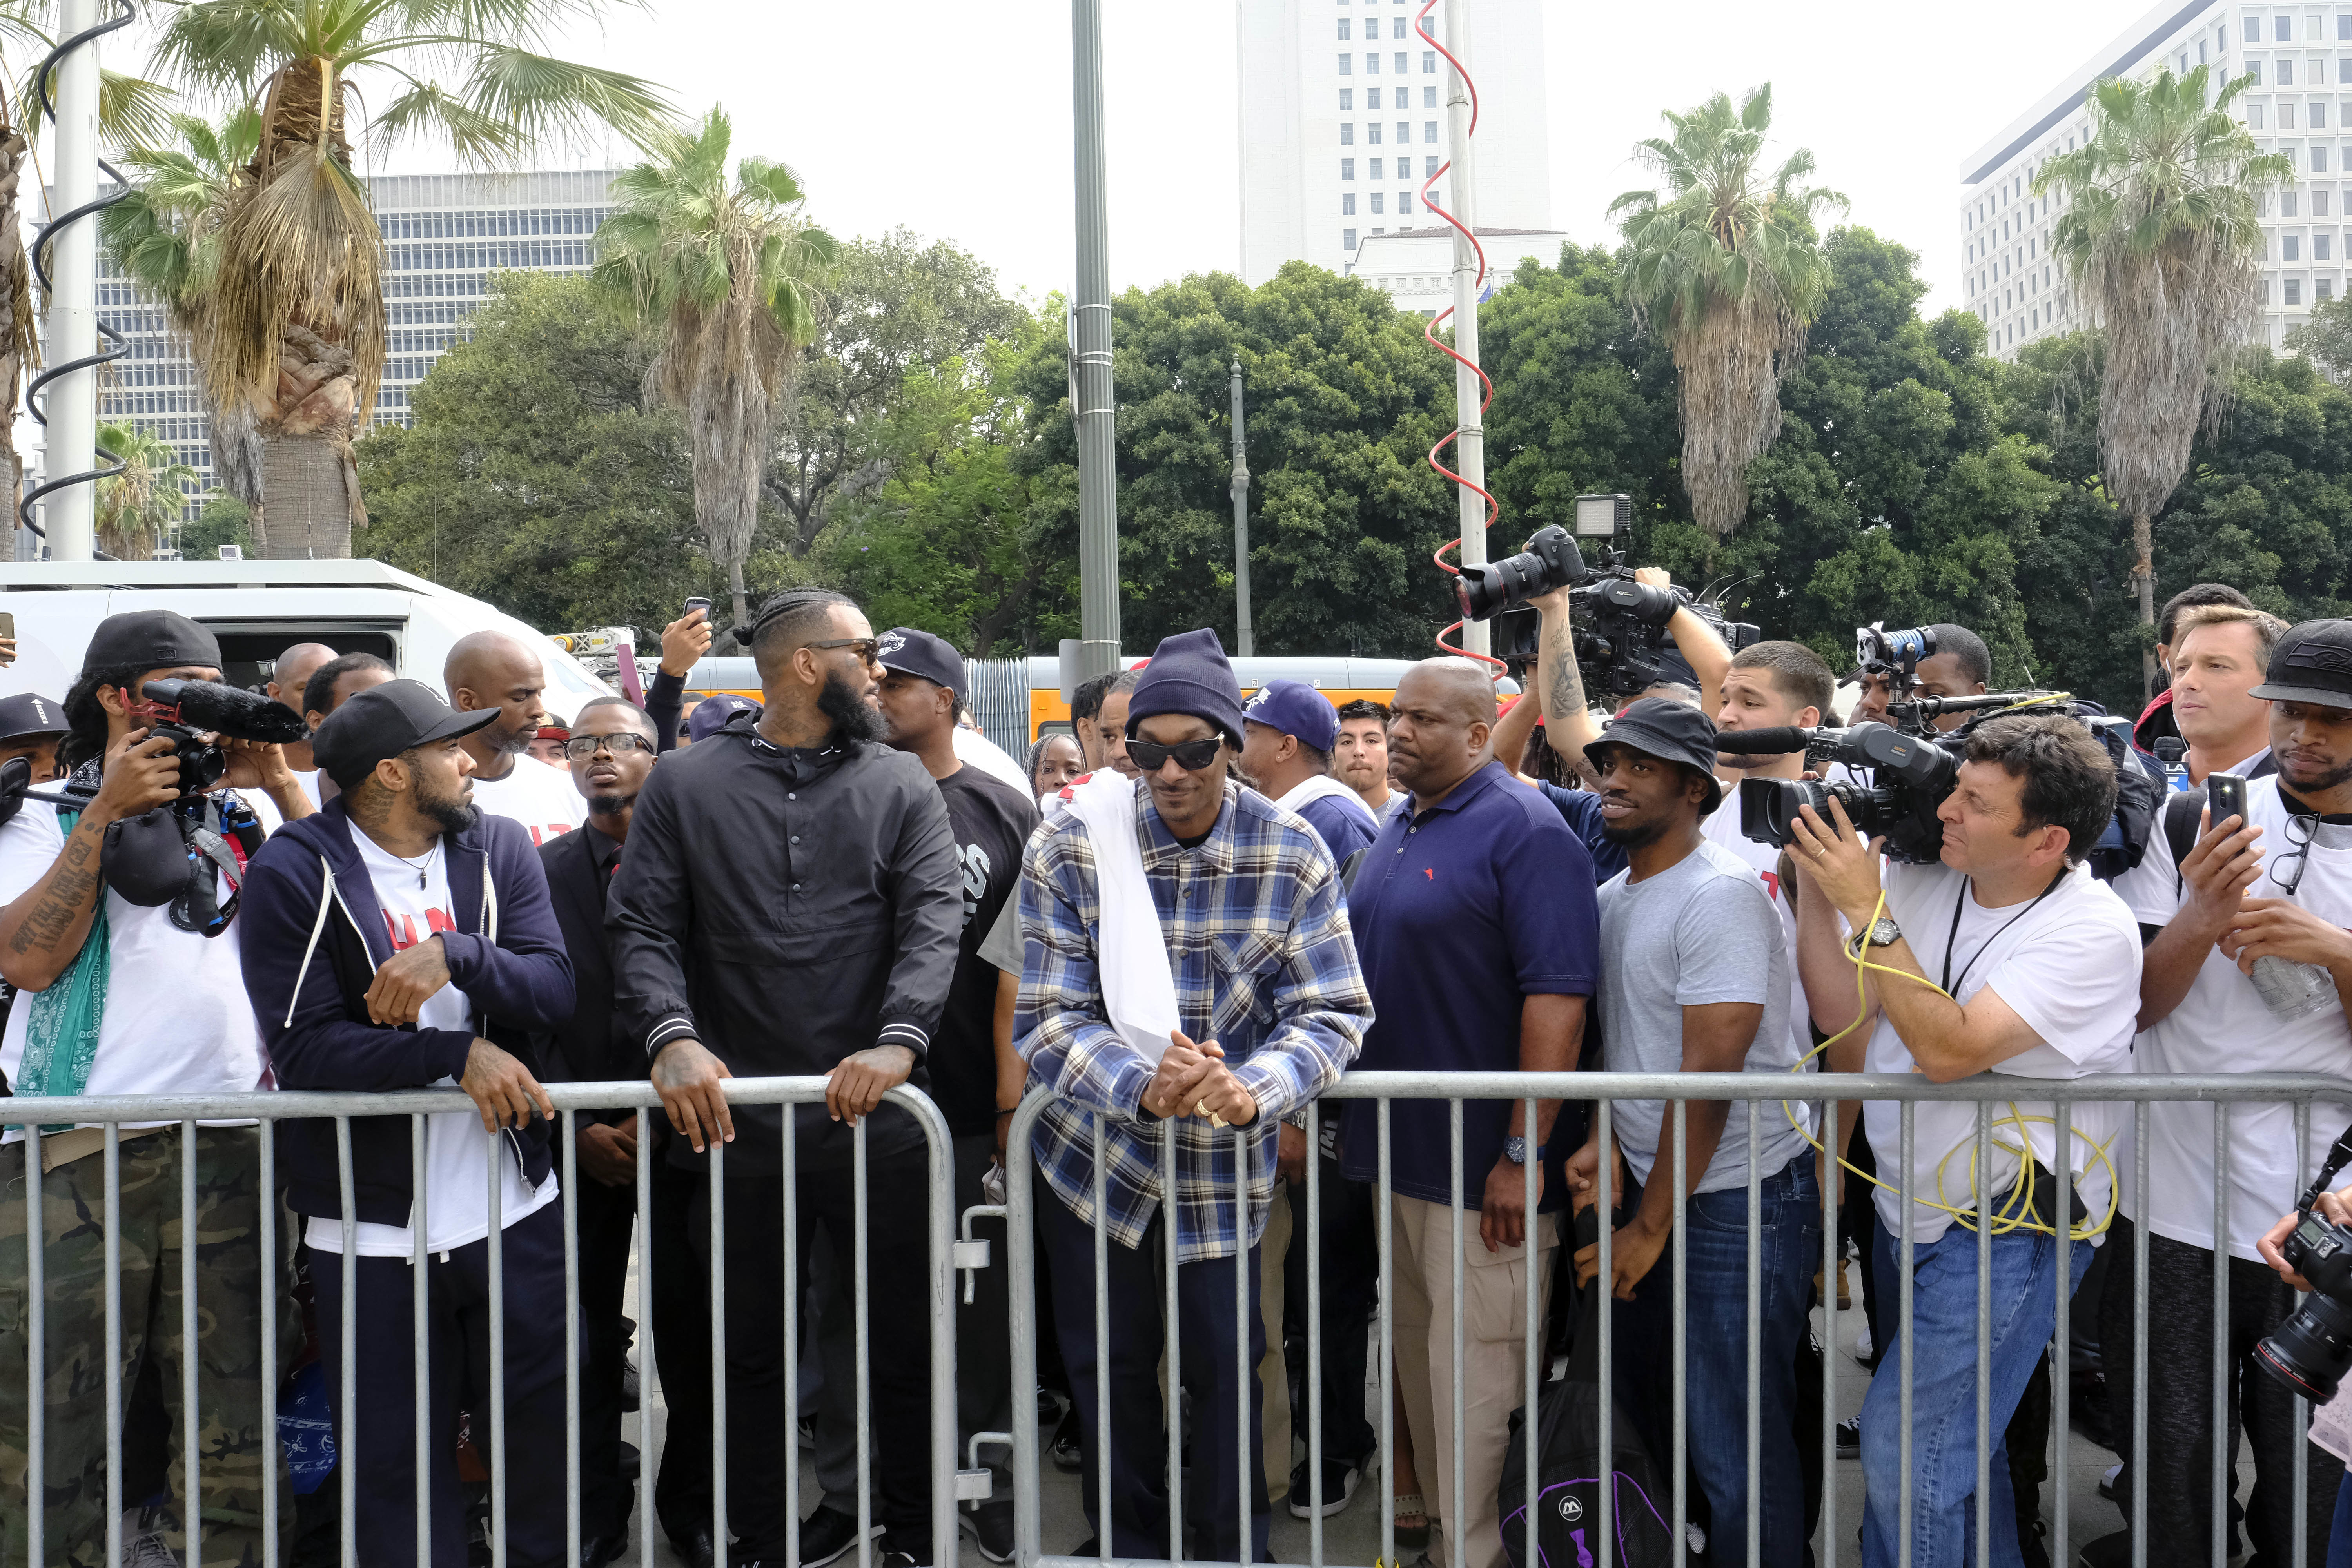 Rappers The Game, third from left, and Snoop Dogg, center, lead a march in support of unification outside of the graduation ceremony for the latest class of Los Angeles Police recruits in Los Angeles, Friday, July 8, 2016, after the shooting deaths of multiple police officers in Dallas on Thursday night. (AP Photo/Richard Vogel)